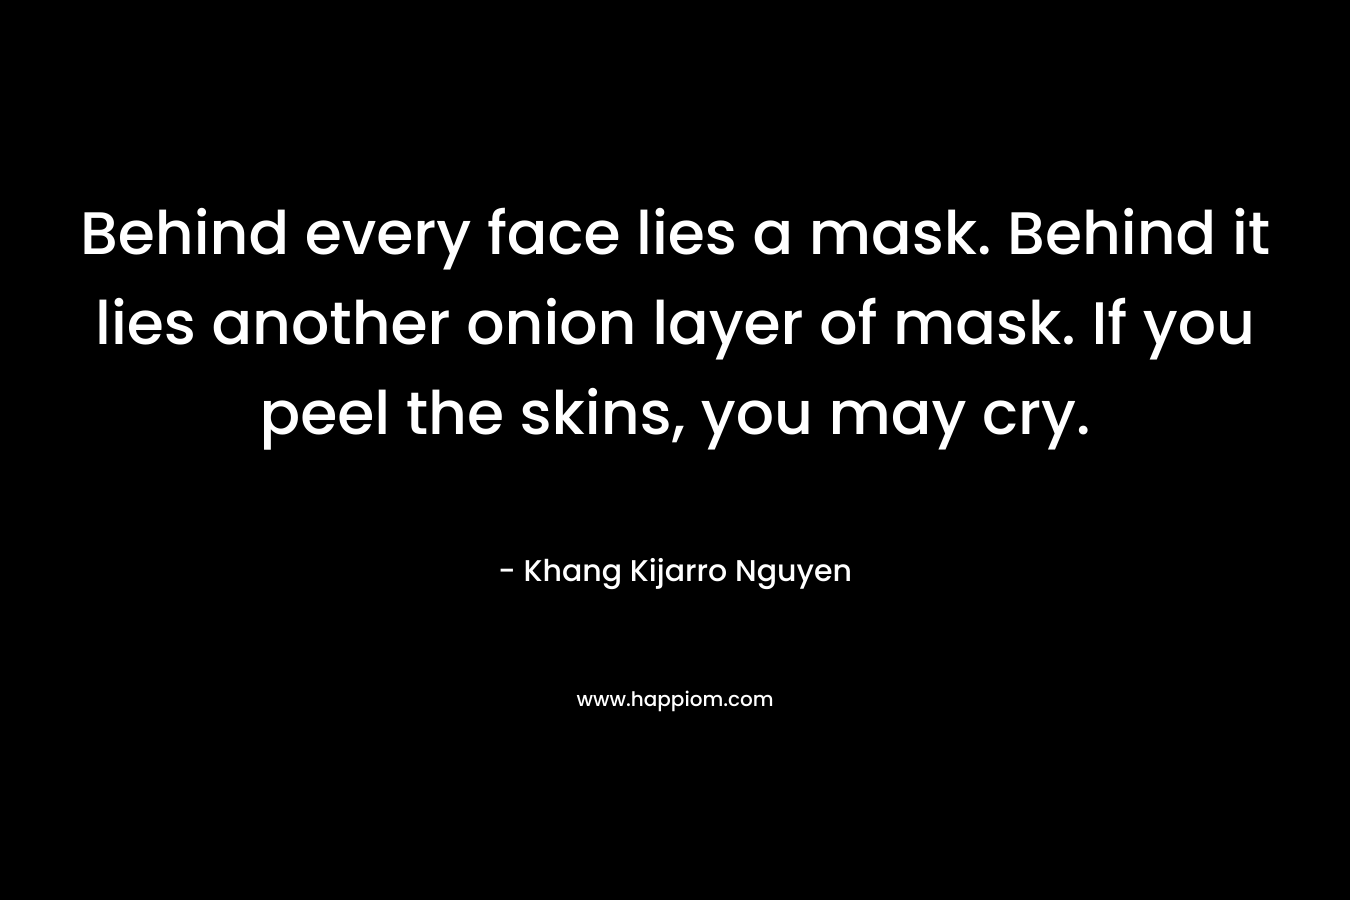 Behind every face lies a mask. Behind it lies another onion layer of mask. If you peel the skins, you may cry. – Khang Kijarro Nguyen